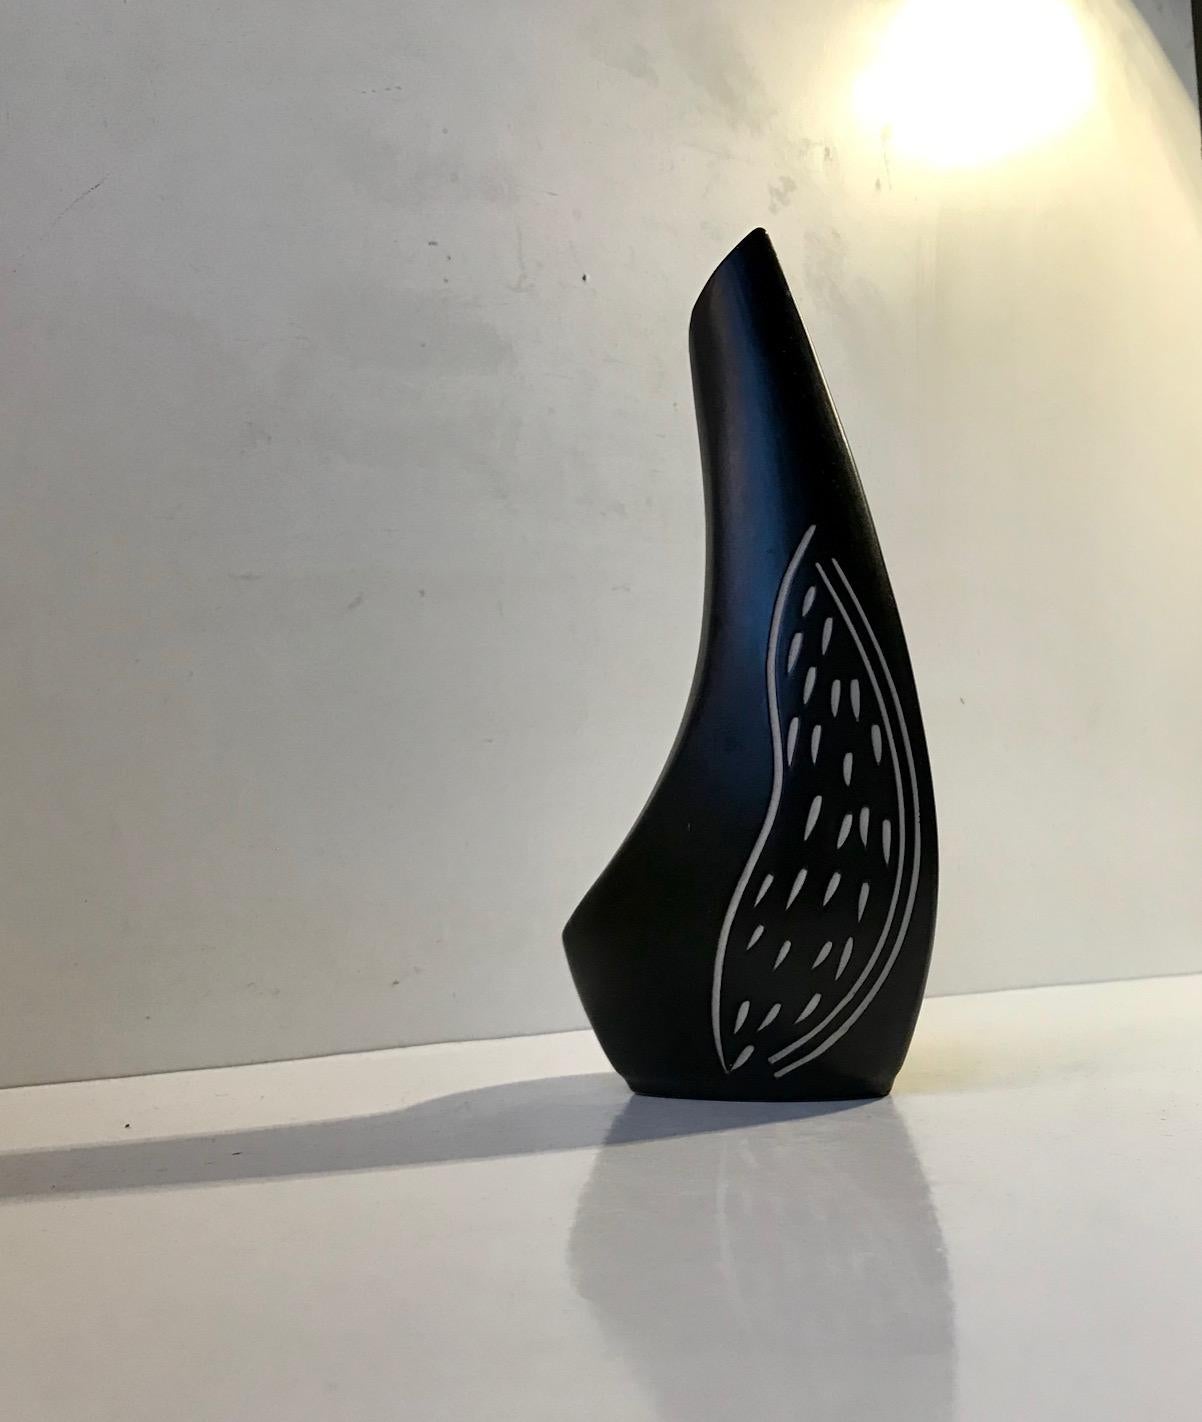 Biomorphic, tactile vase almost shaped like the torso of a standing bird. It has a subtle black main glaze and is decorated by hand with white stripes. It was designed and studio made by the Danish ceramist Elisabeth Loholt during the early 1960s in